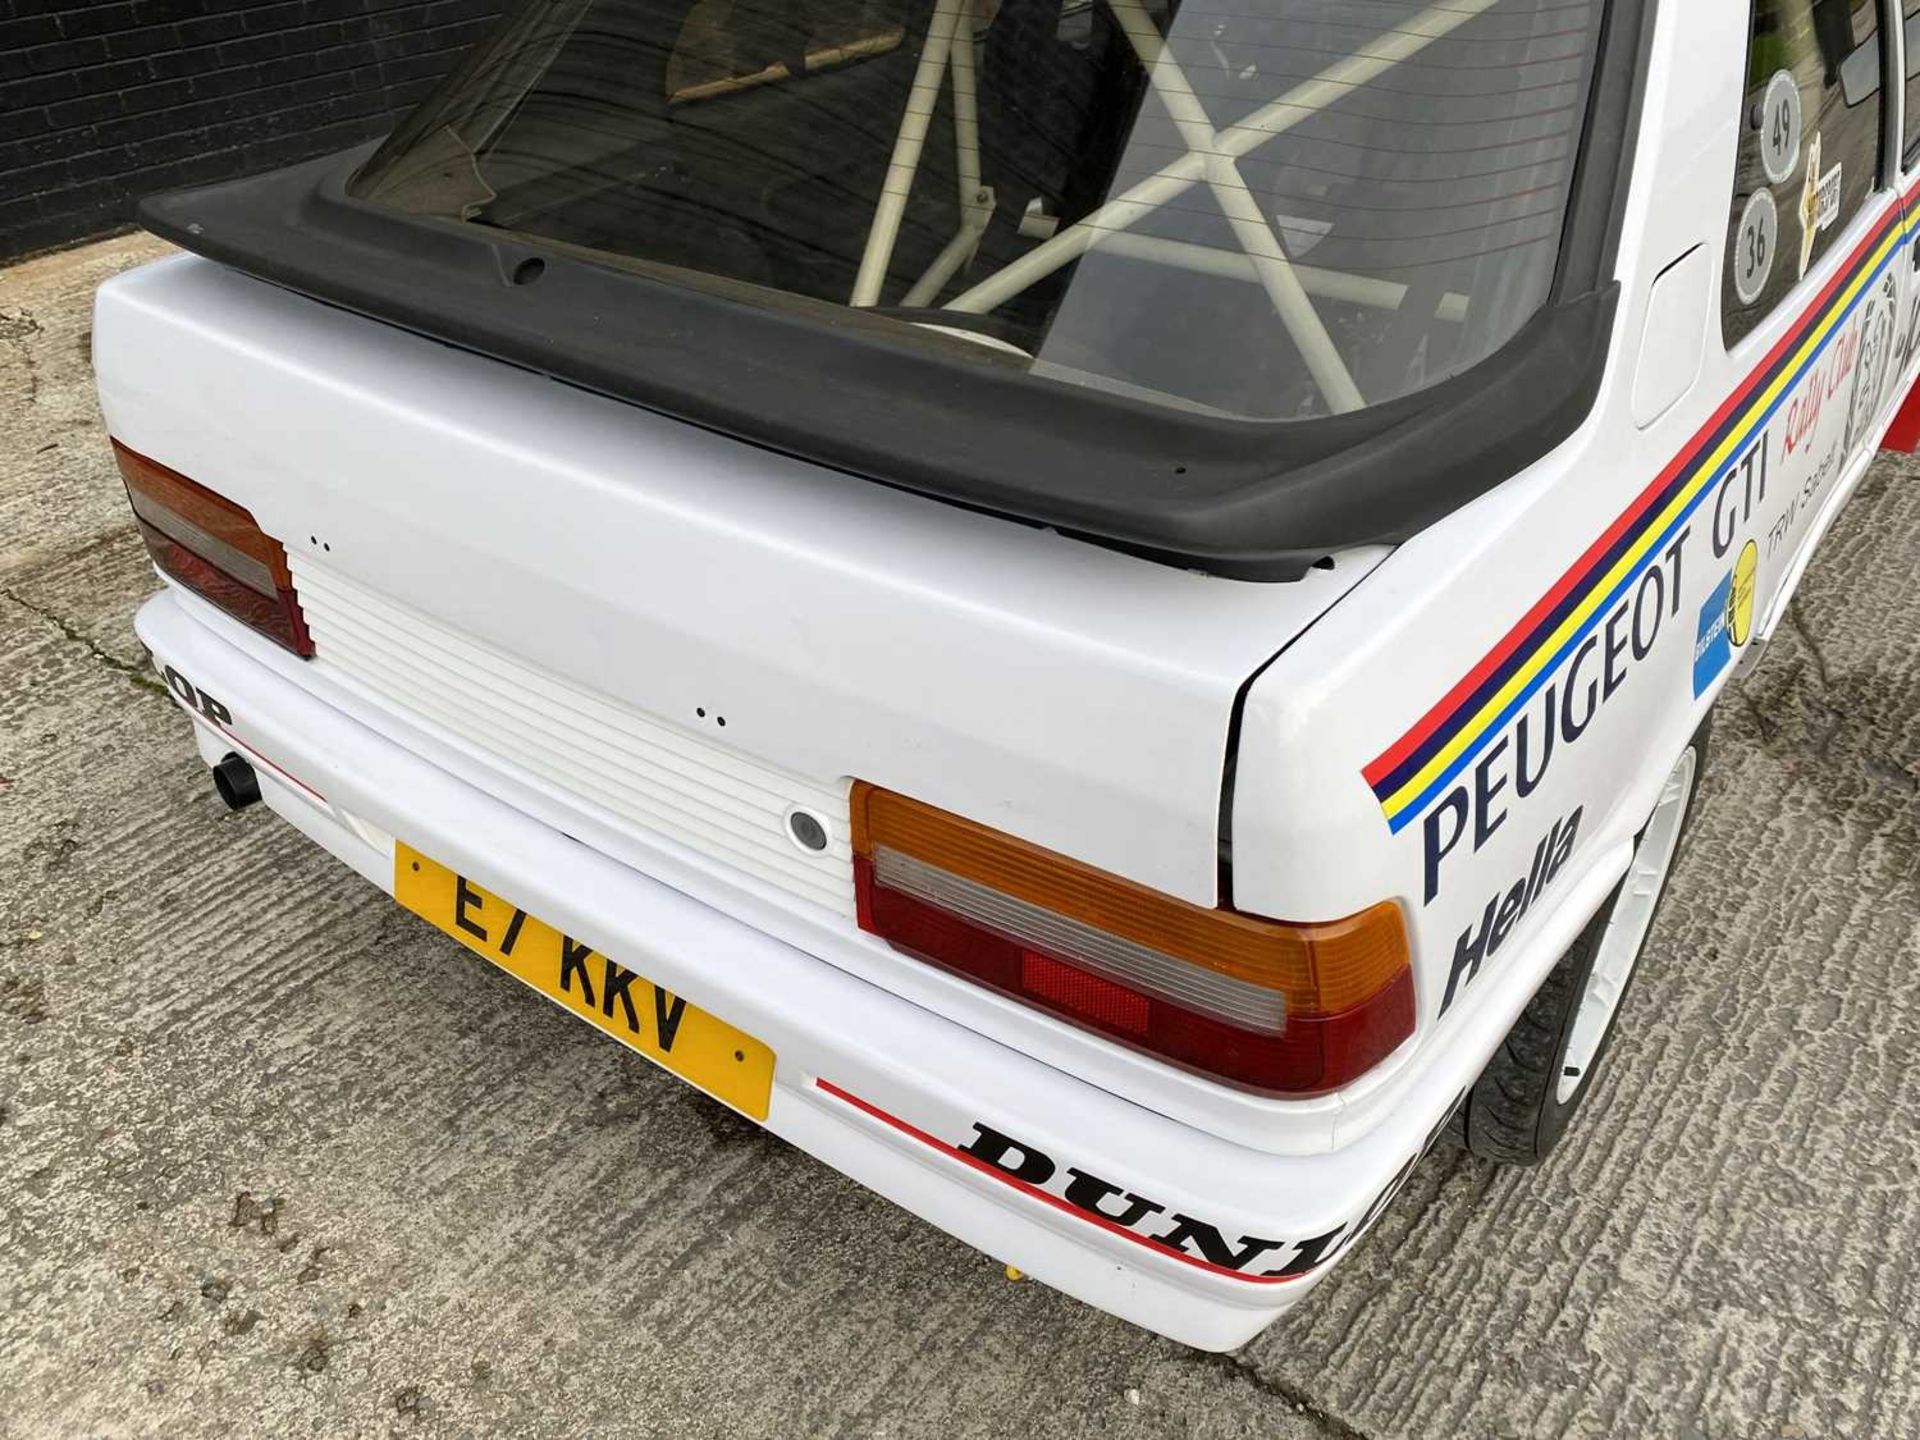 1987 Peugeot 309 GTi Group N Rally Car FIA paperwork and a previous entrant at the Goodwood Festival - Image 36 of 50